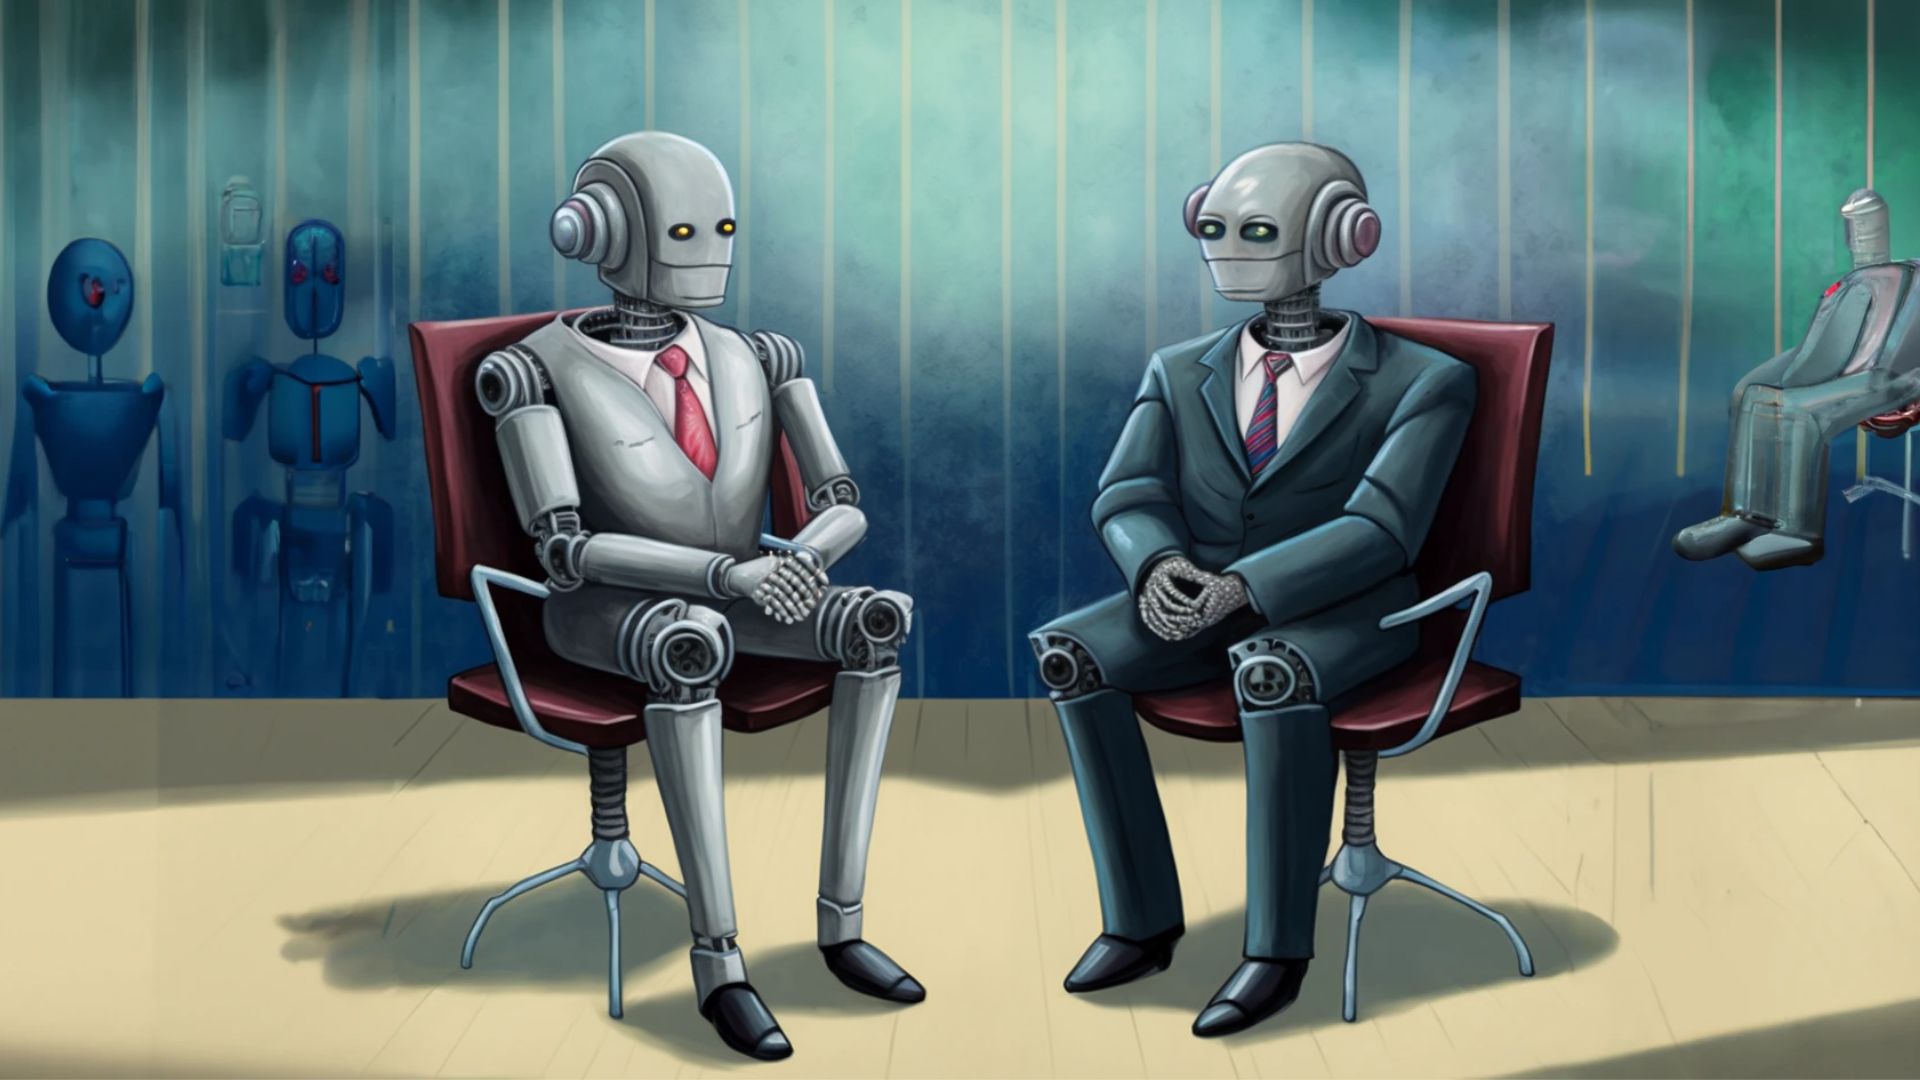 The danger of advanced artificial intelligence controlling its own feedback